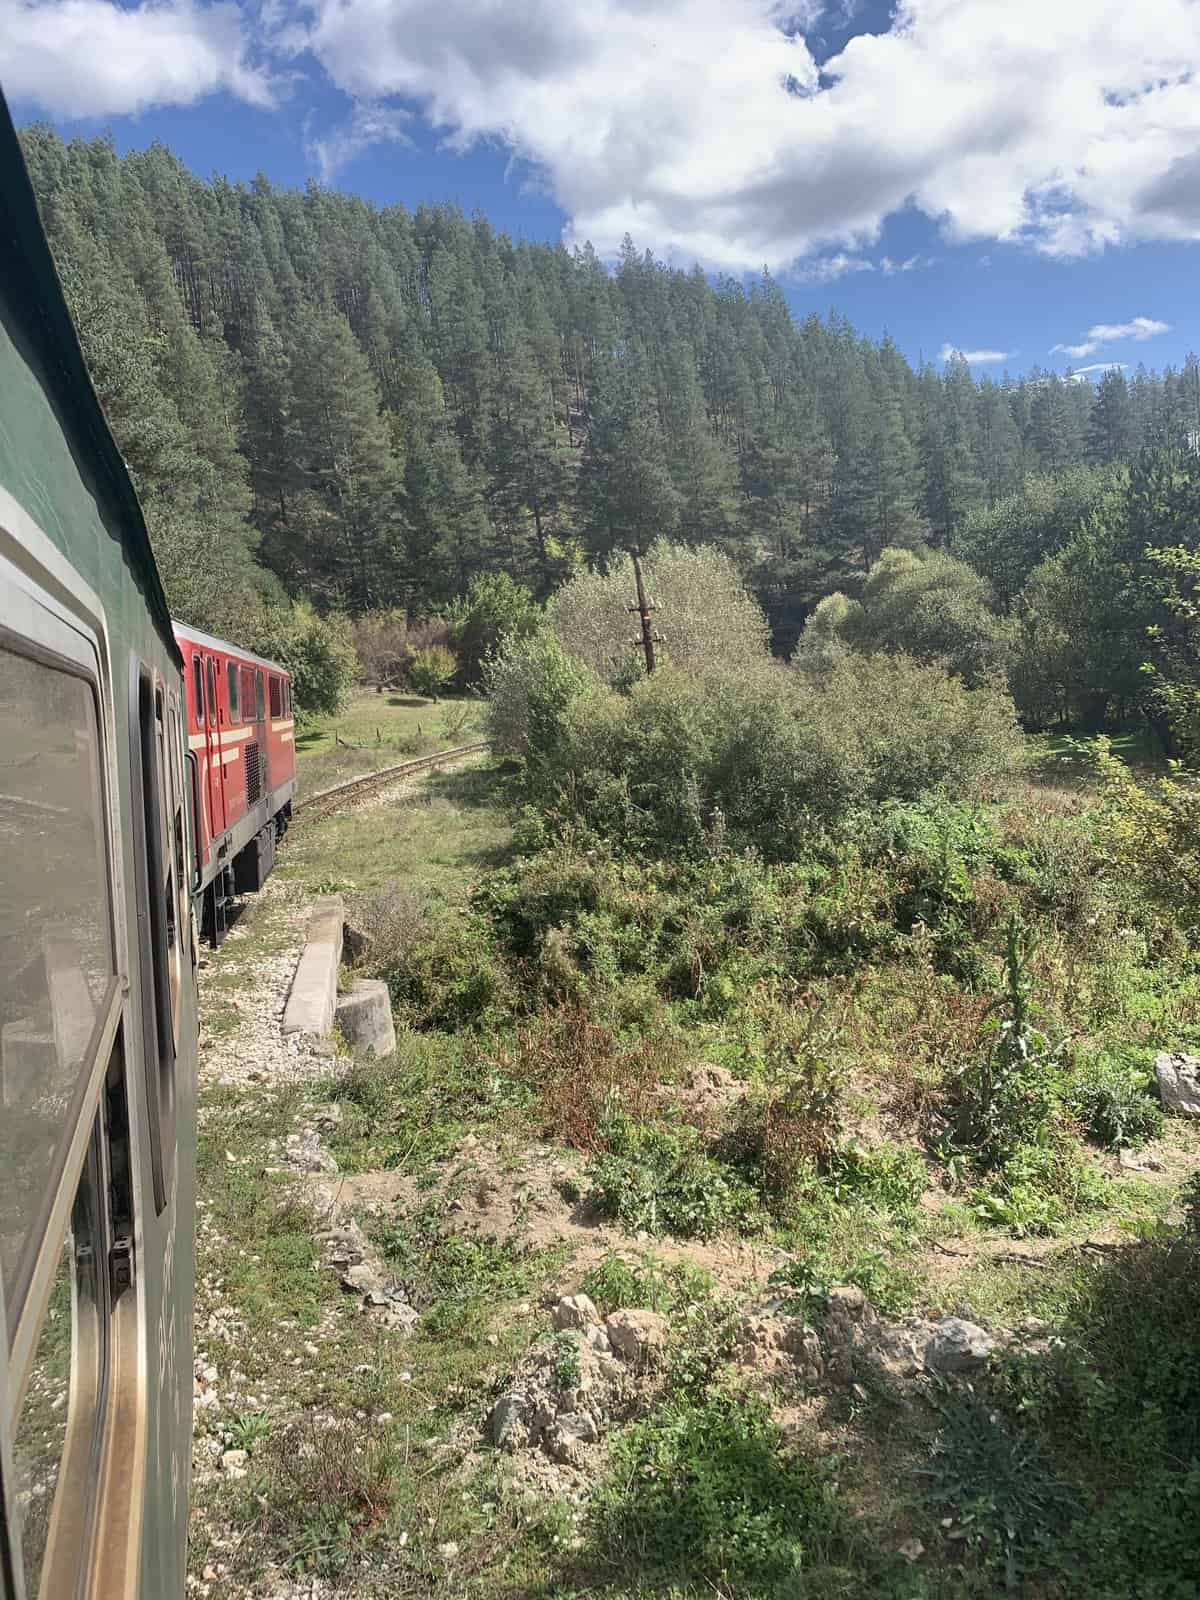 Traveling by train in the mountains is one of the cheapest ways to travel in Bulgaria.